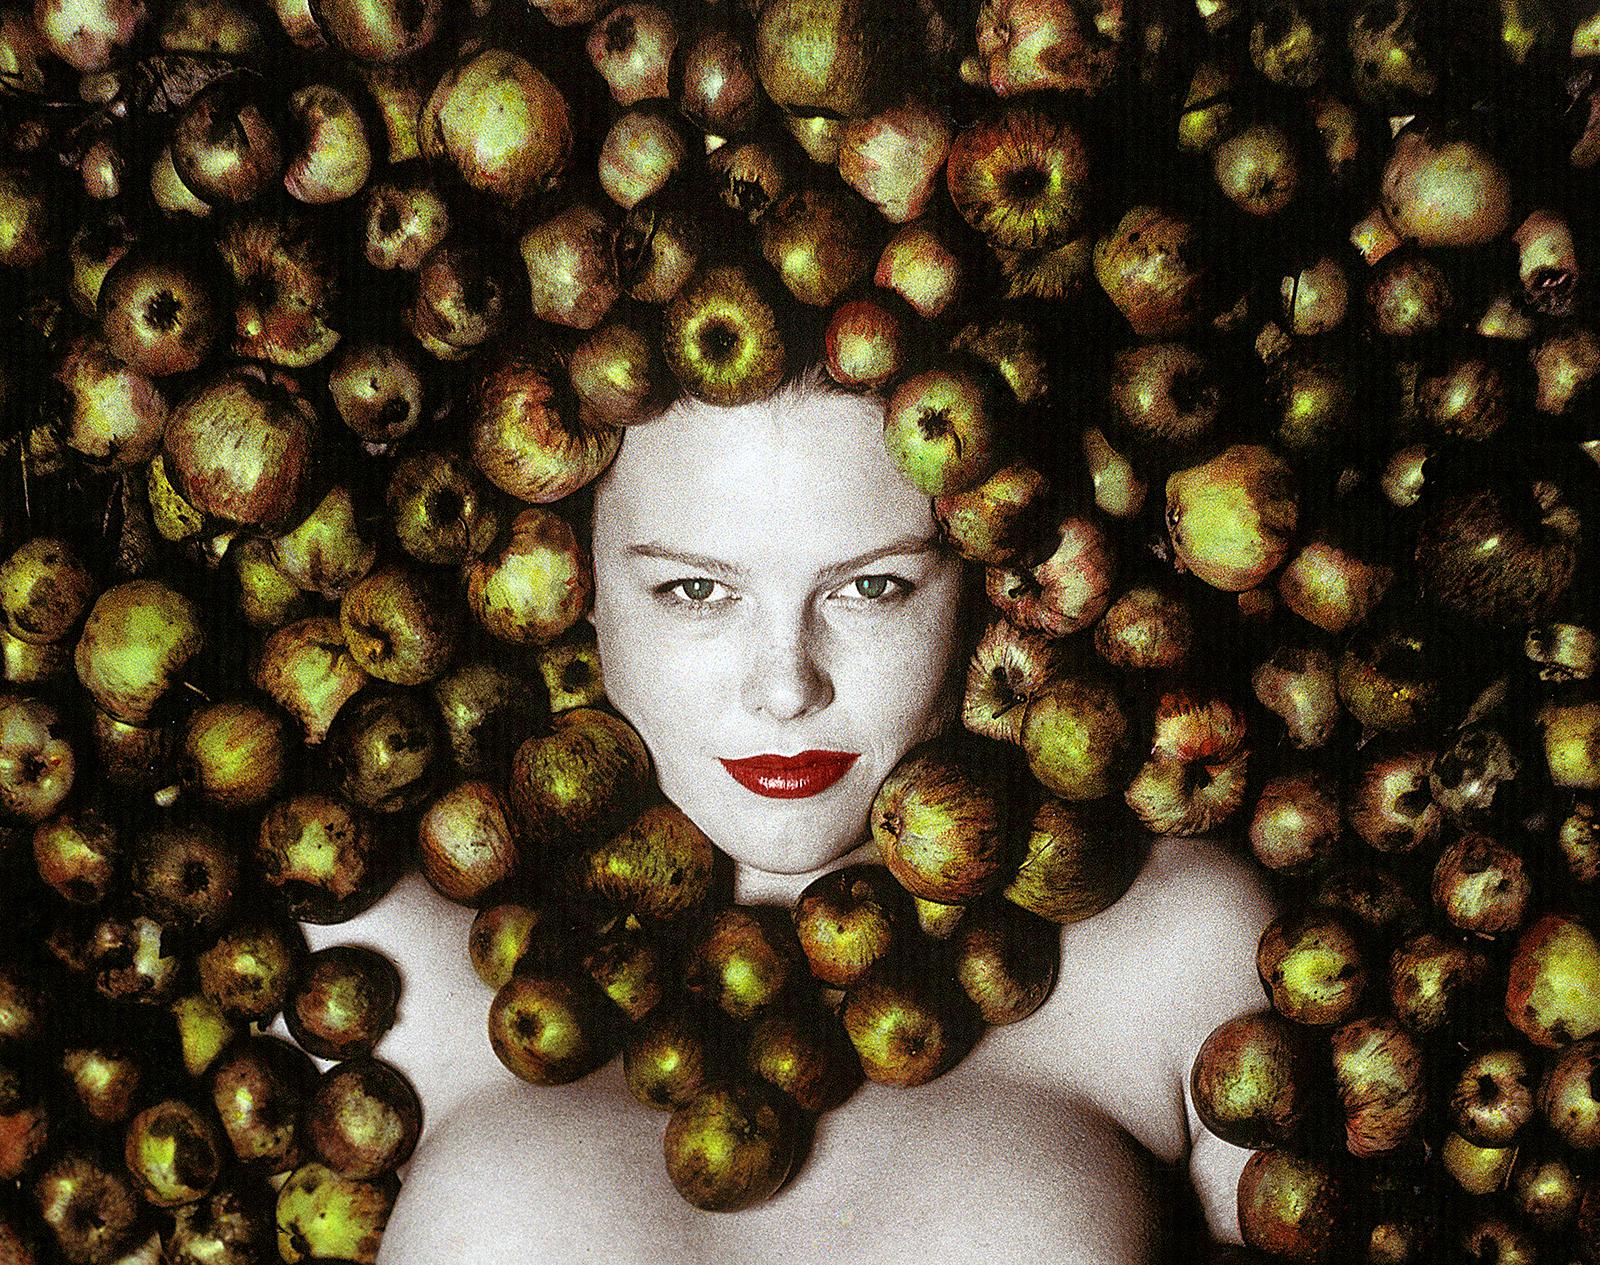 Apples - Signed limited edition still life fine art print, Color photo, Model - Photograph by Ian Sanderson